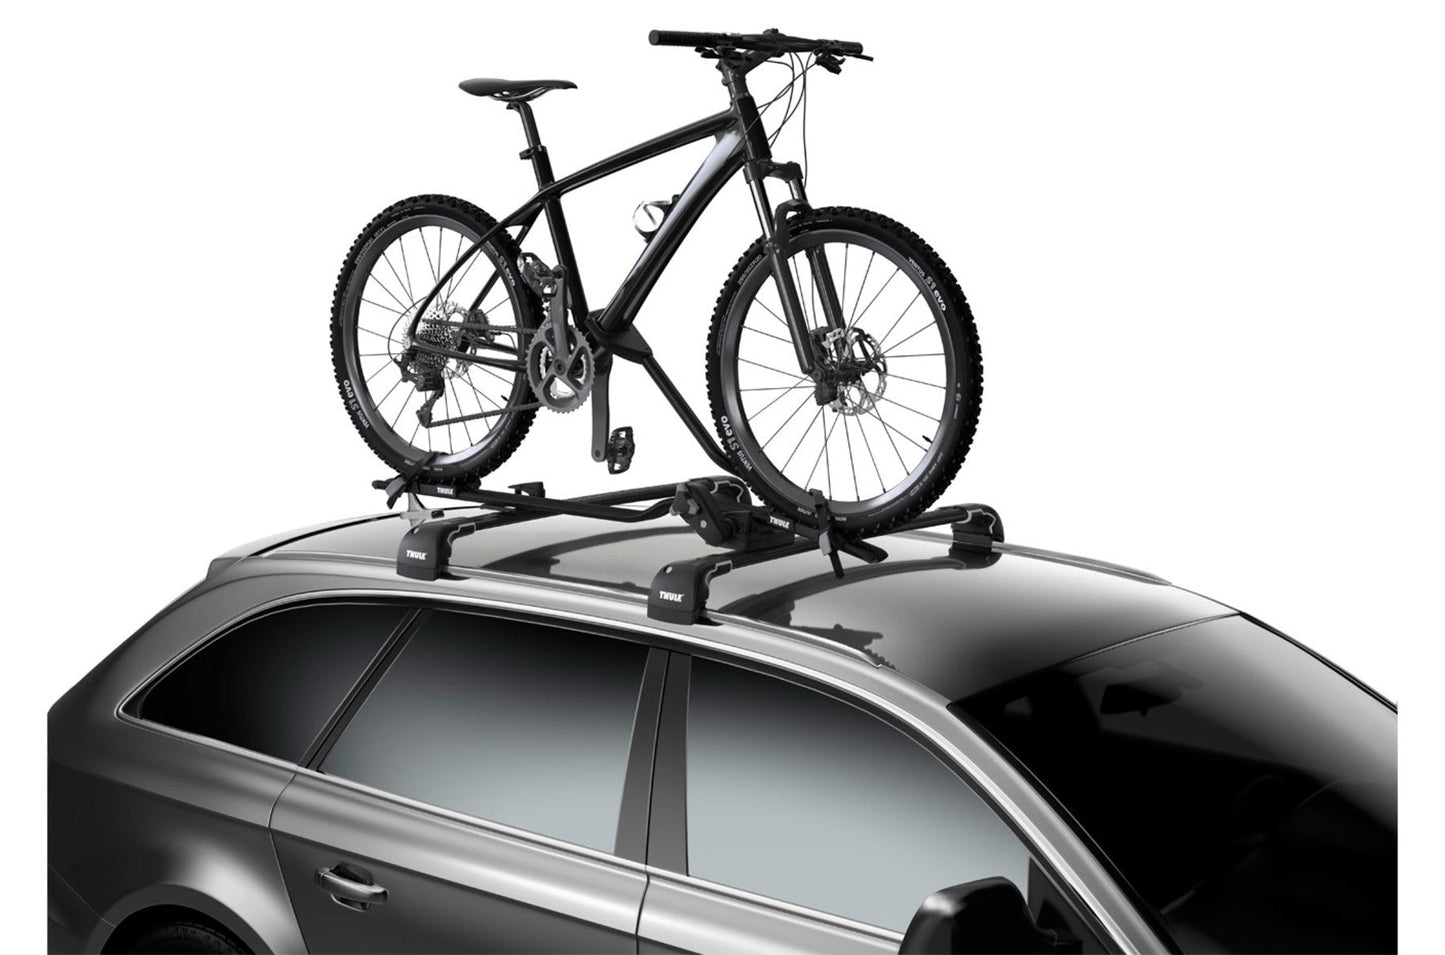 THULE ProRide (Roof Bike Rack) Black - Letang Auto Electrical Vehicle Parts